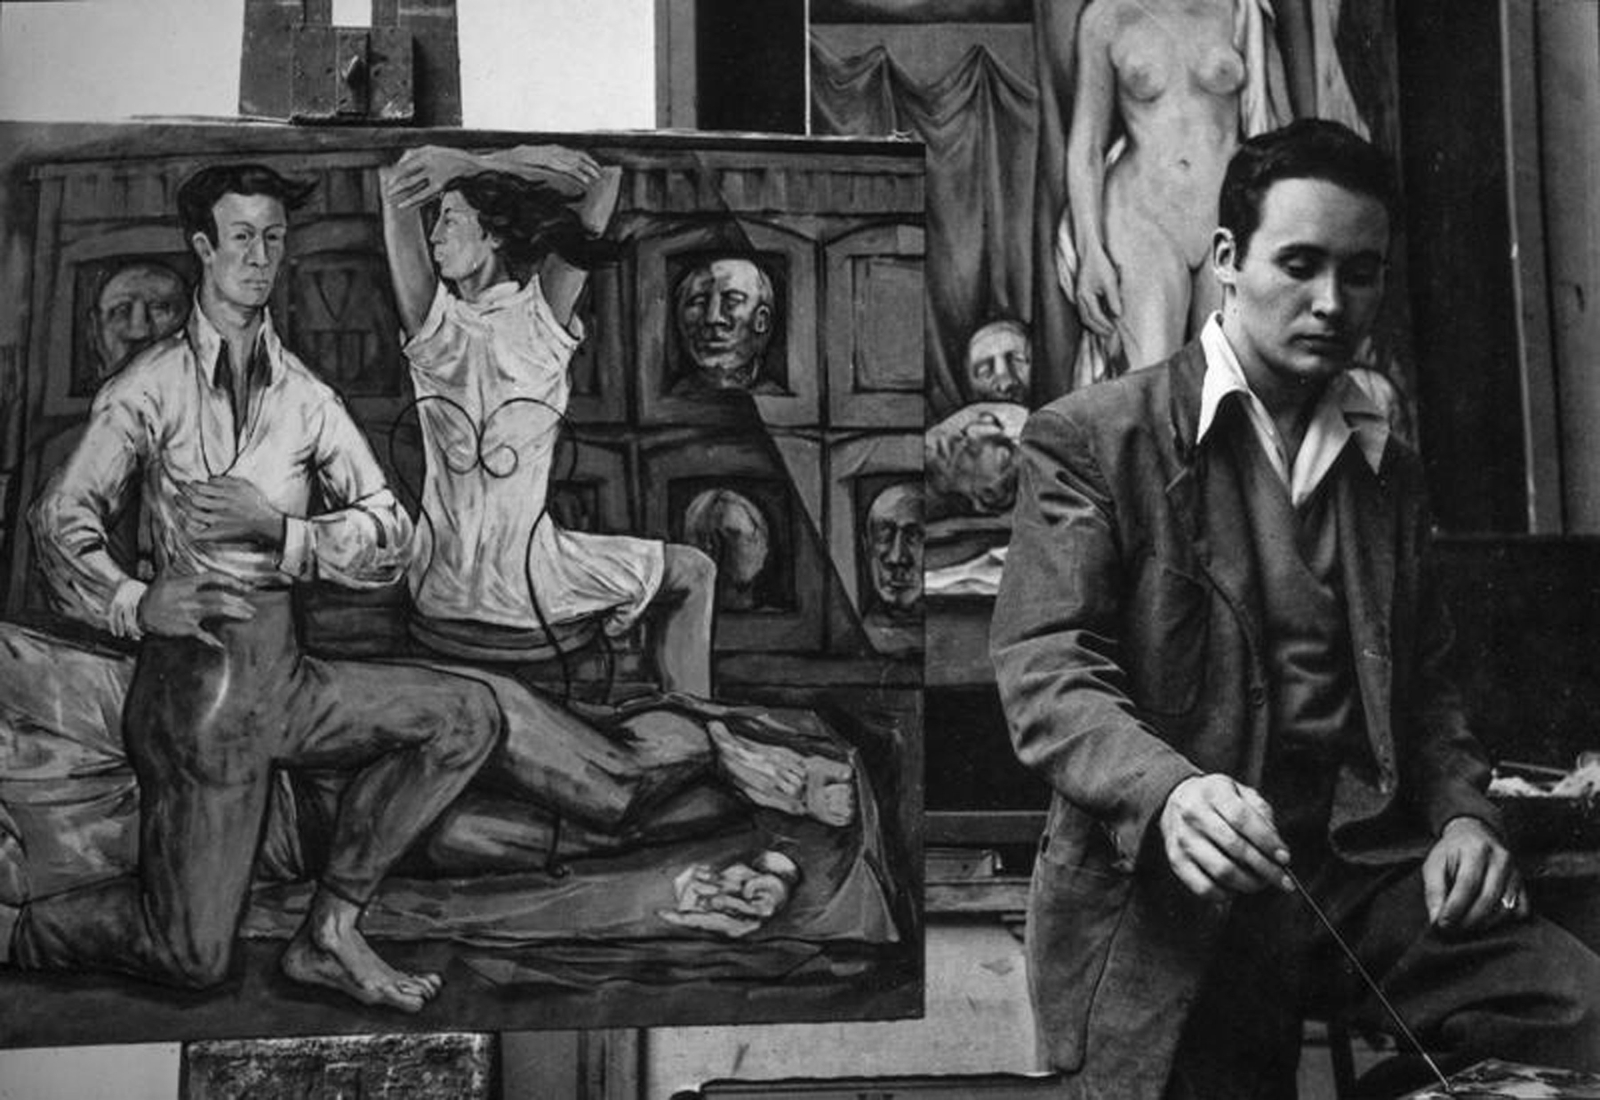 Robert Clark, Chicago, 1953, with the untitled oil painting (later destroyed) that helped him to win a Foreign Travelling Fellowship from the Art Institute of Chicago. Image courtesy of&amp;nbsp;Dennis and Diana Griggs, Maine